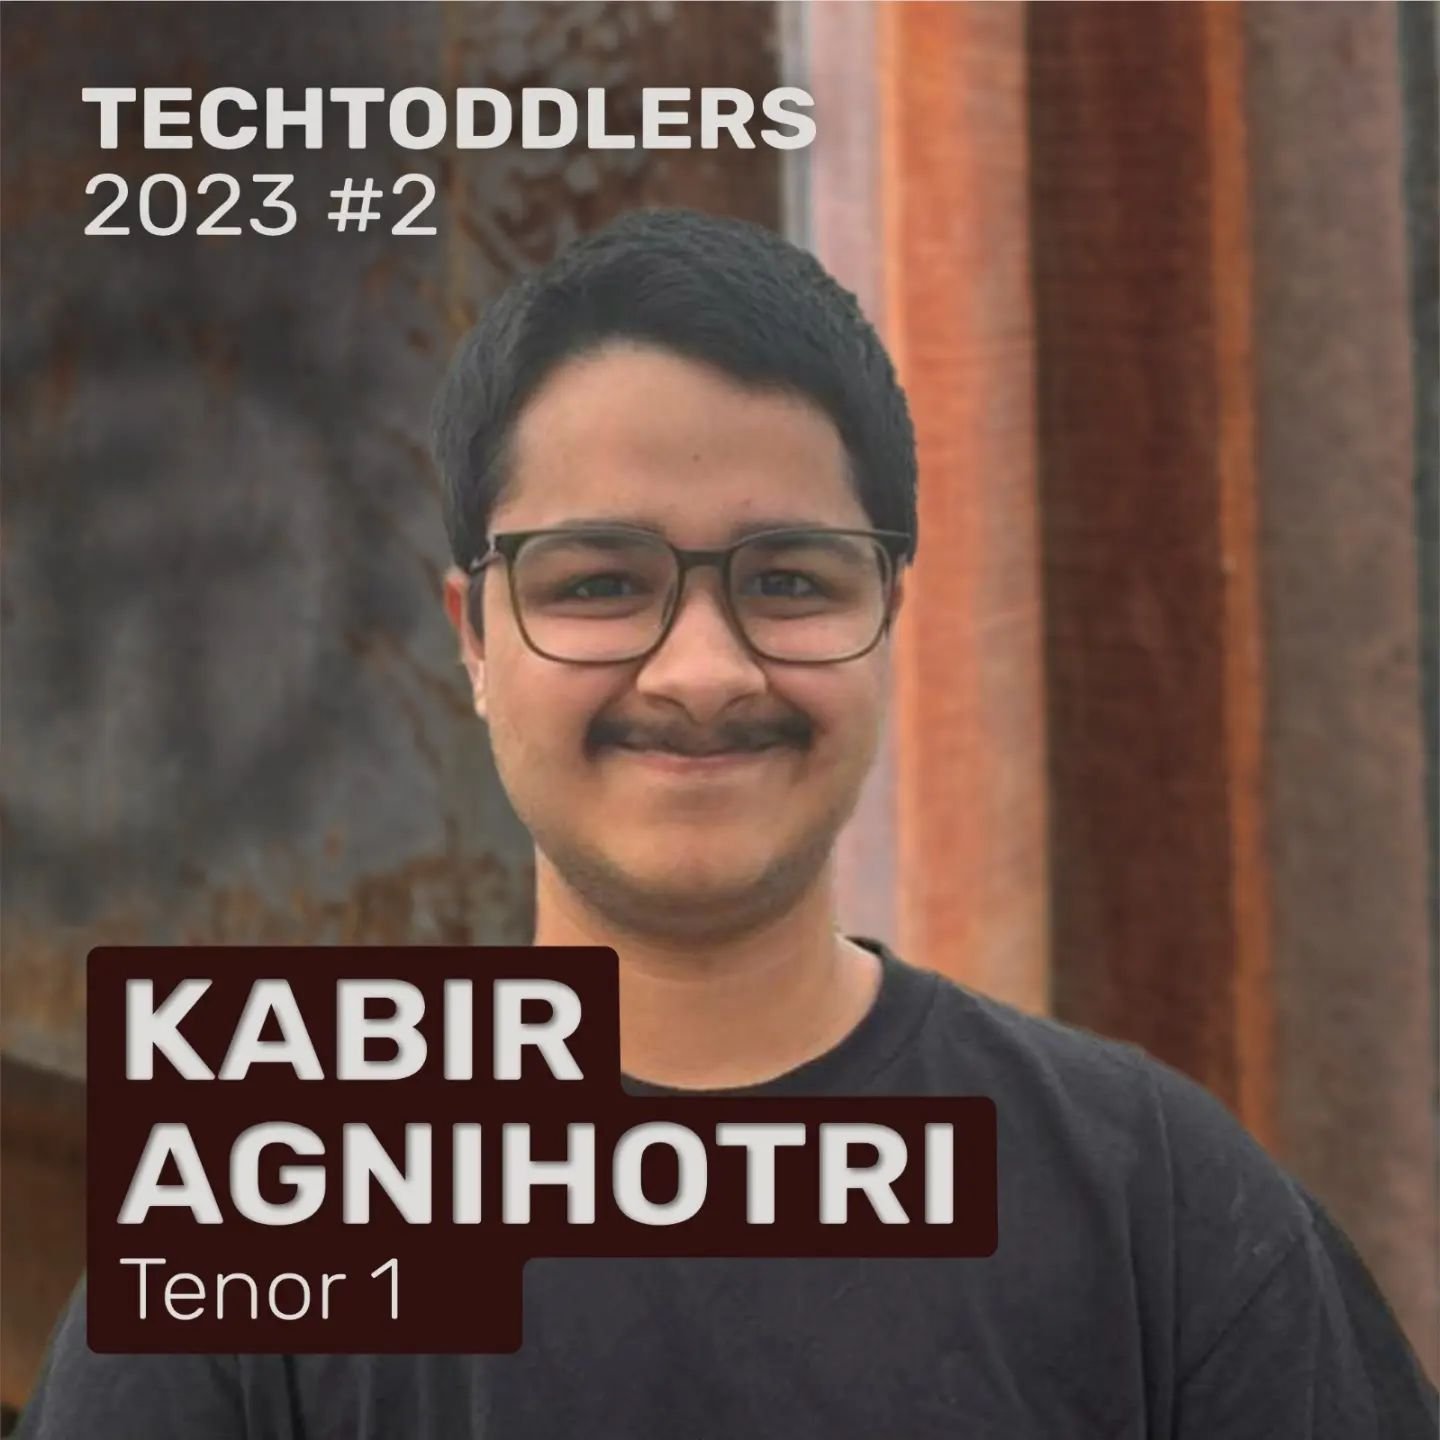 Omg what!? There's a SECOND BATCH of 2023 TechToddlers? That's right, and first up it's Kabir! Clearly Giulio has been working hard to swing the computing department in our favour 👀👀

Kabir may have only joined us a term-time week or two ago but he